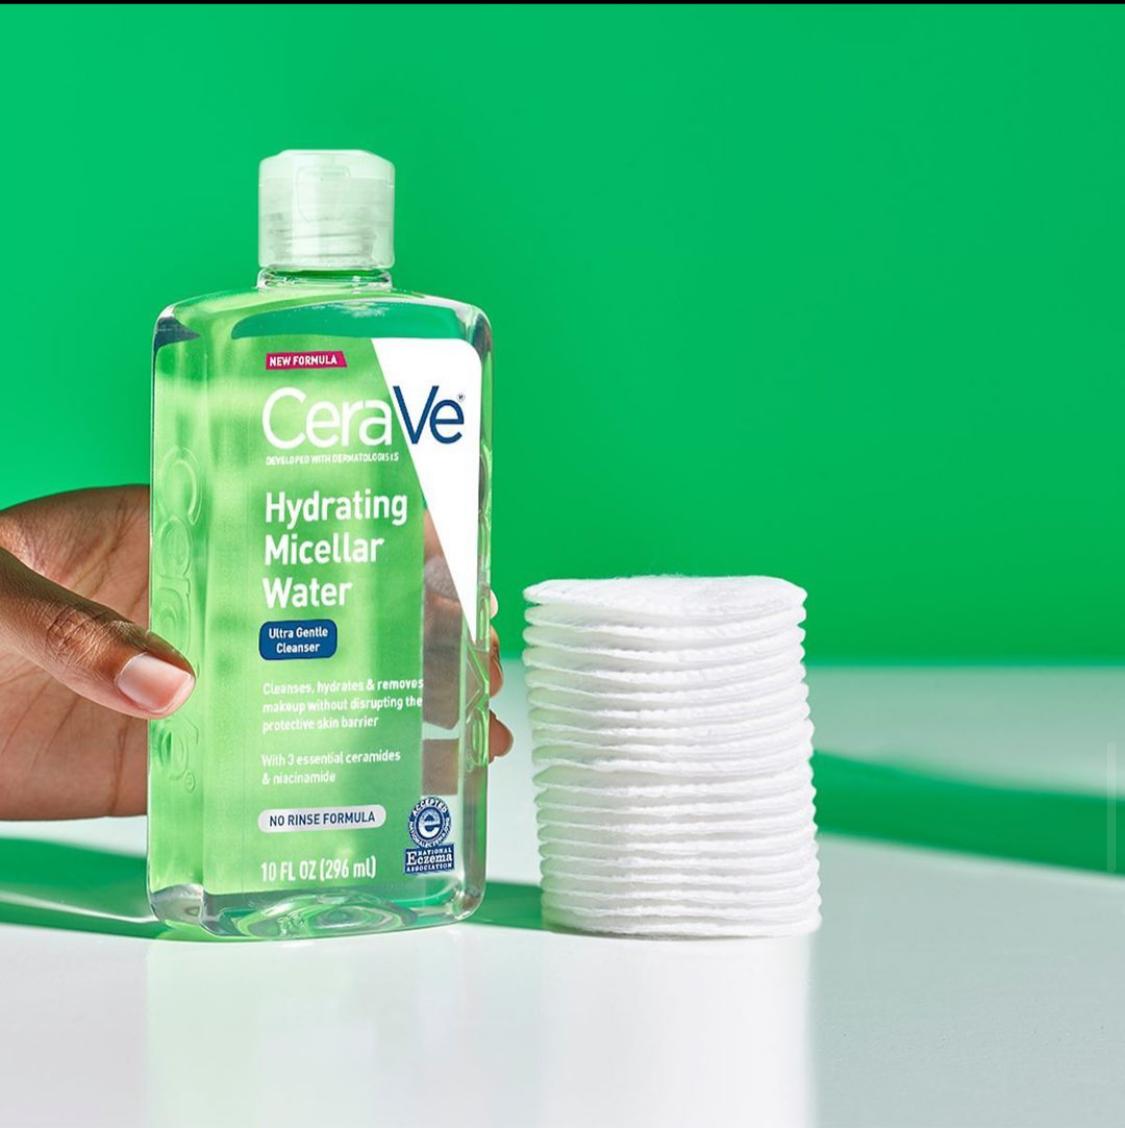 CERAVE Hydrating Micellar Water